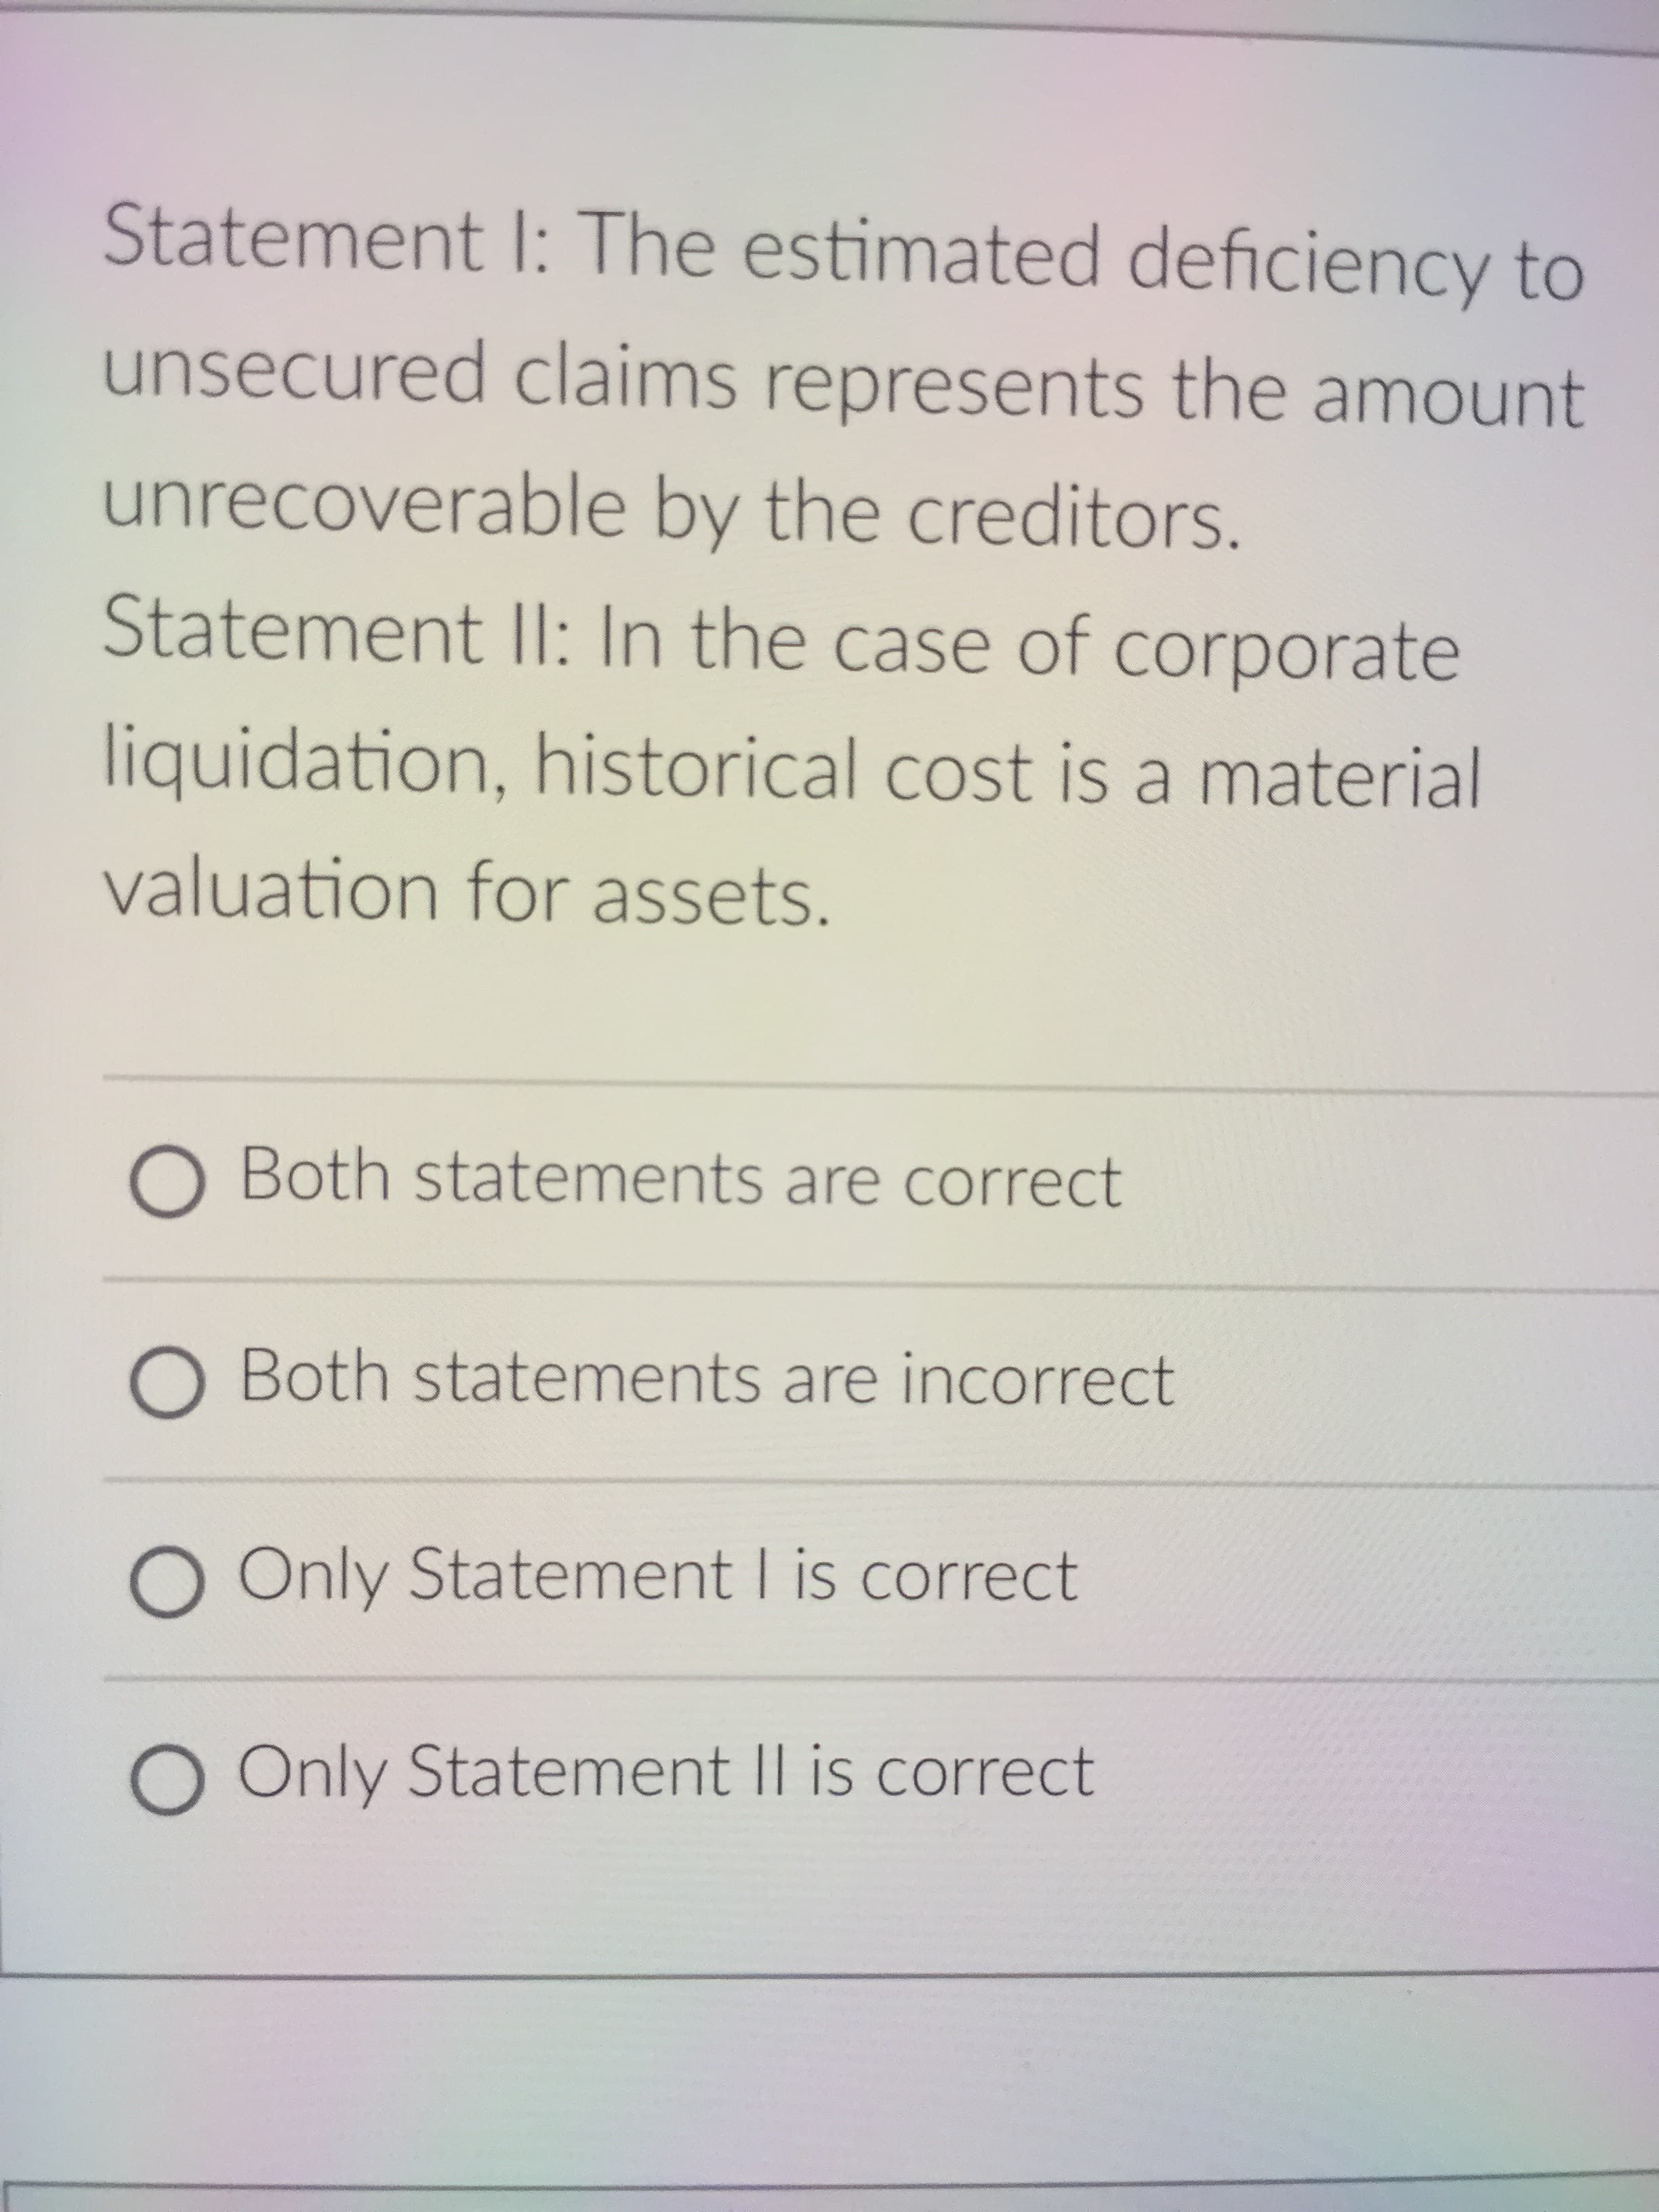 Statement I: The estimated deficiency to
unsecured claims represents the amount
unrecoverable by the creditors.
Statement II: In the case of corporate
liquidation, historical cost is a material
valuation for assets.
O Both statements are correct
O Both statements are incorrect
O Only Statement I is correct
O Only Statement I| is correct
